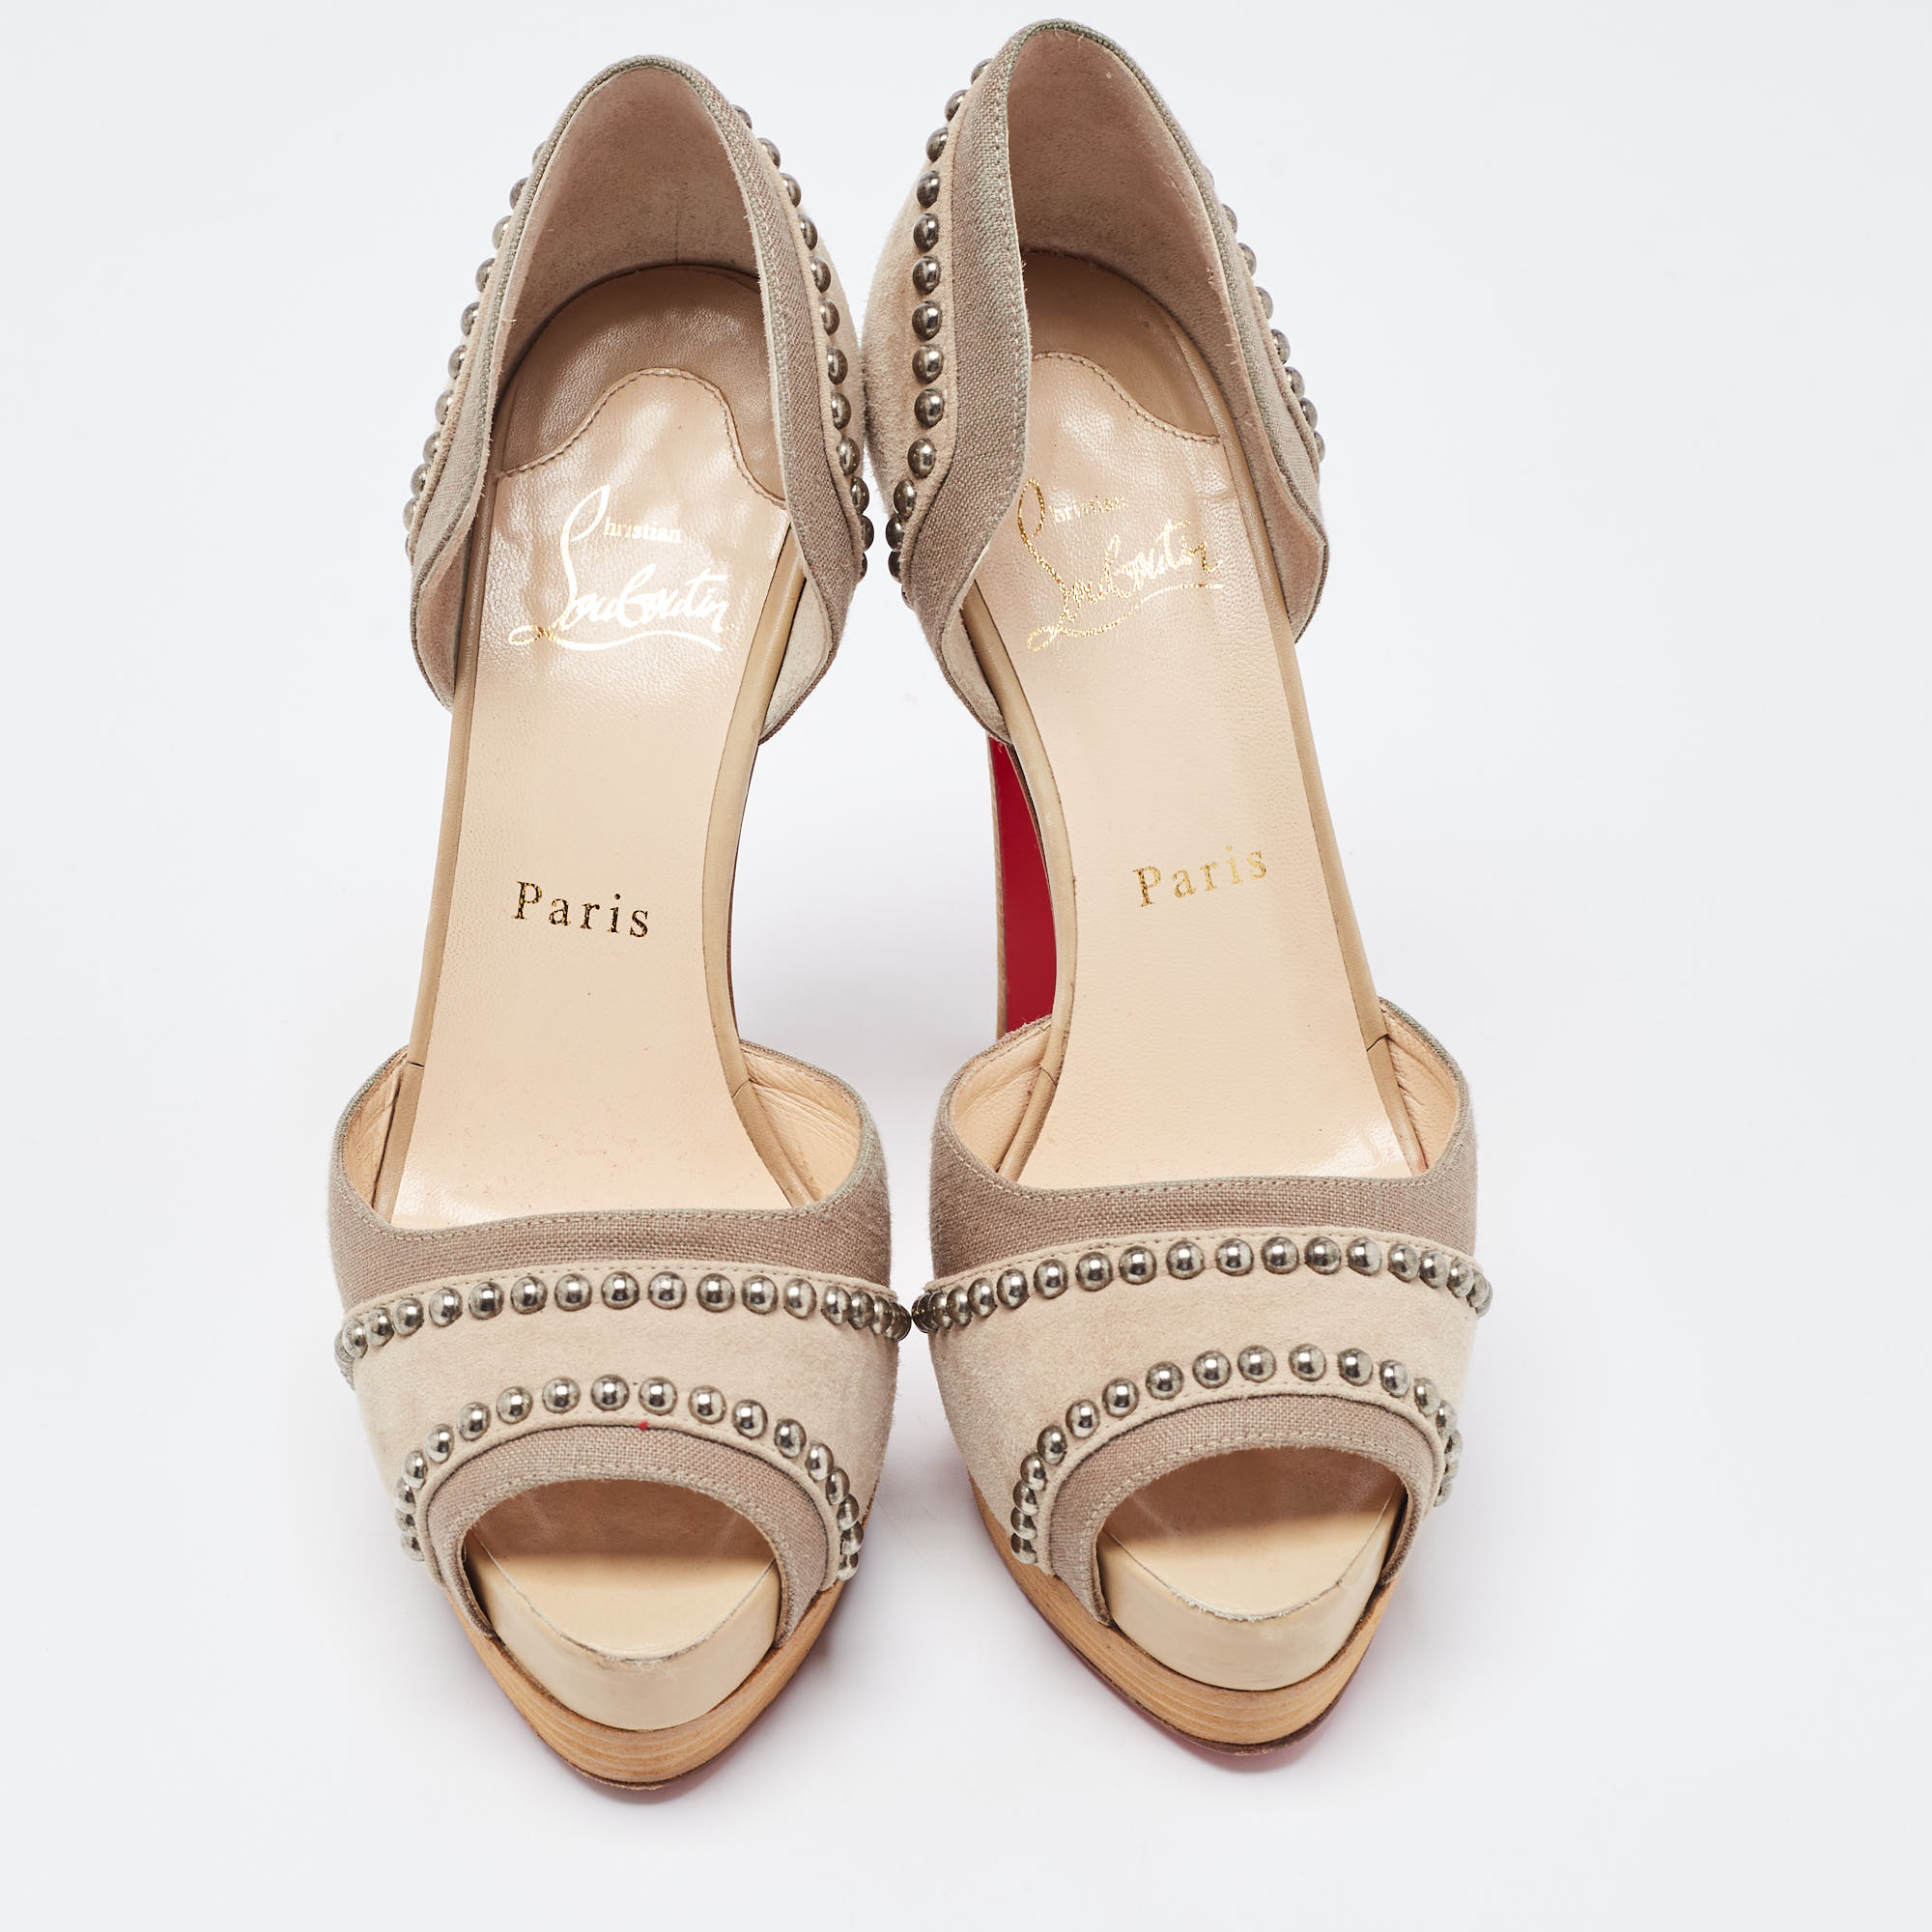 Christian Louboutin Two Tone Studded Suede And Canvas Peep Toe Platform D'orsay Pumps Size 36